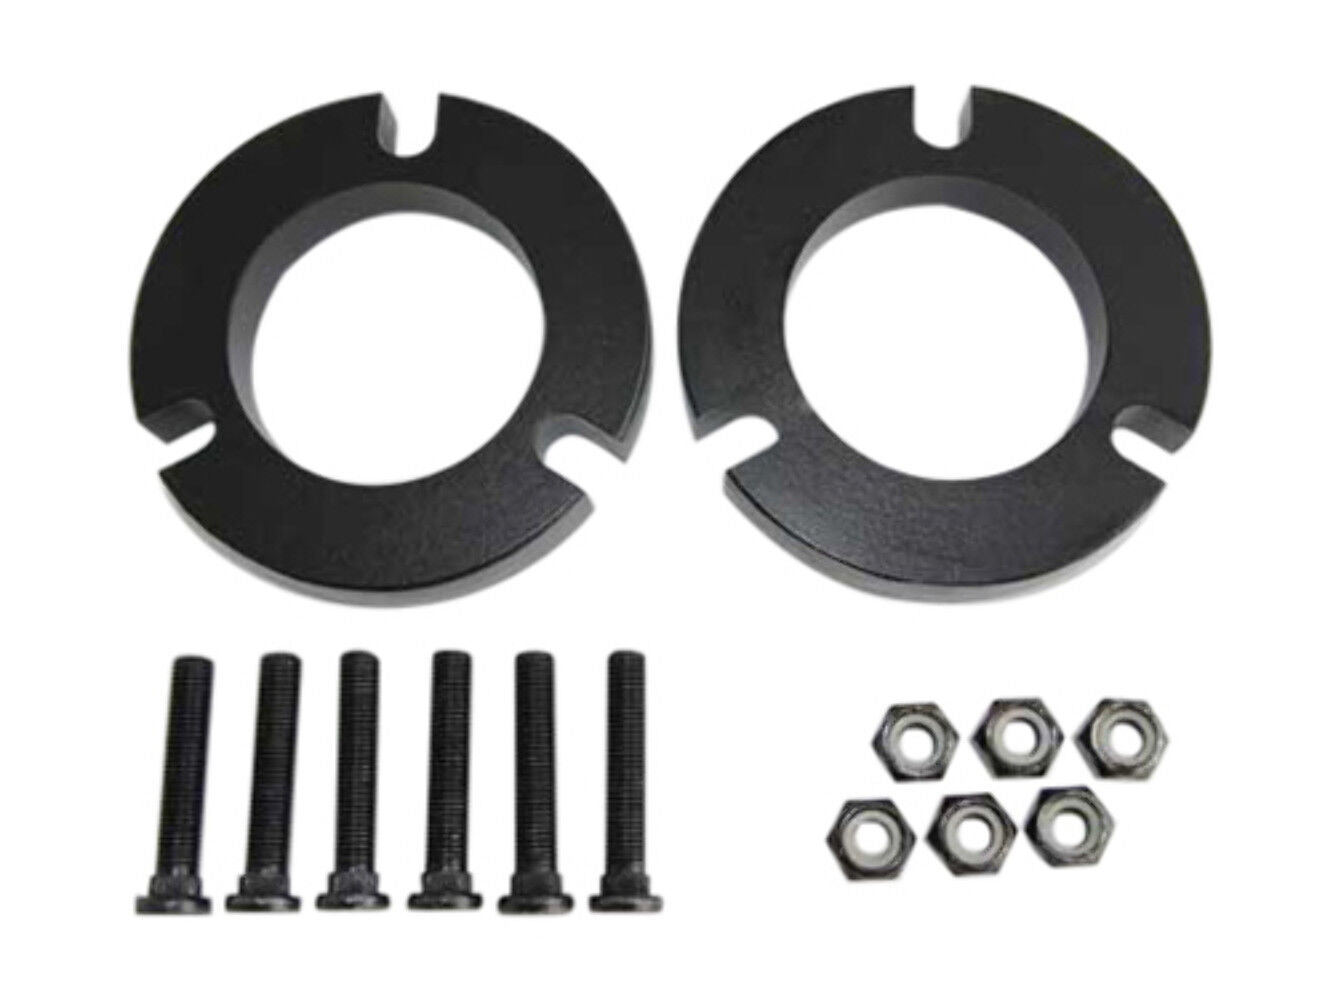 1" Leveling Kit (1/2" Spacer) for Toyota Tacoma 96-19 2wd/4wd 6-LUG